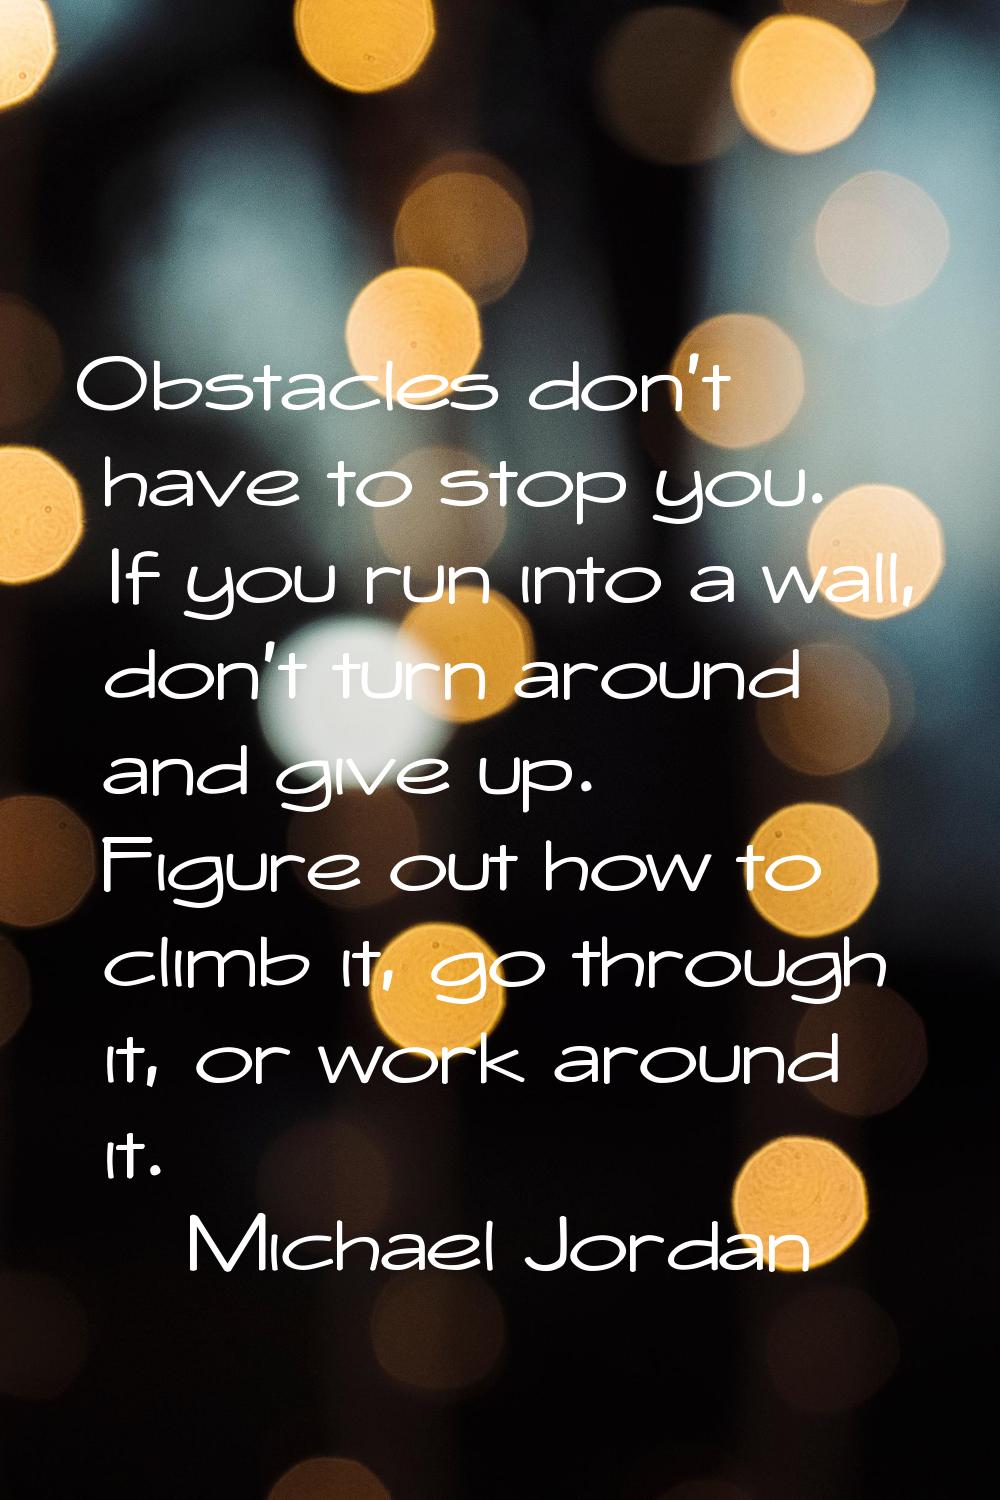 Obstacles don't have to stop you. If you run into a wall, don't turn around and give up. Figure out